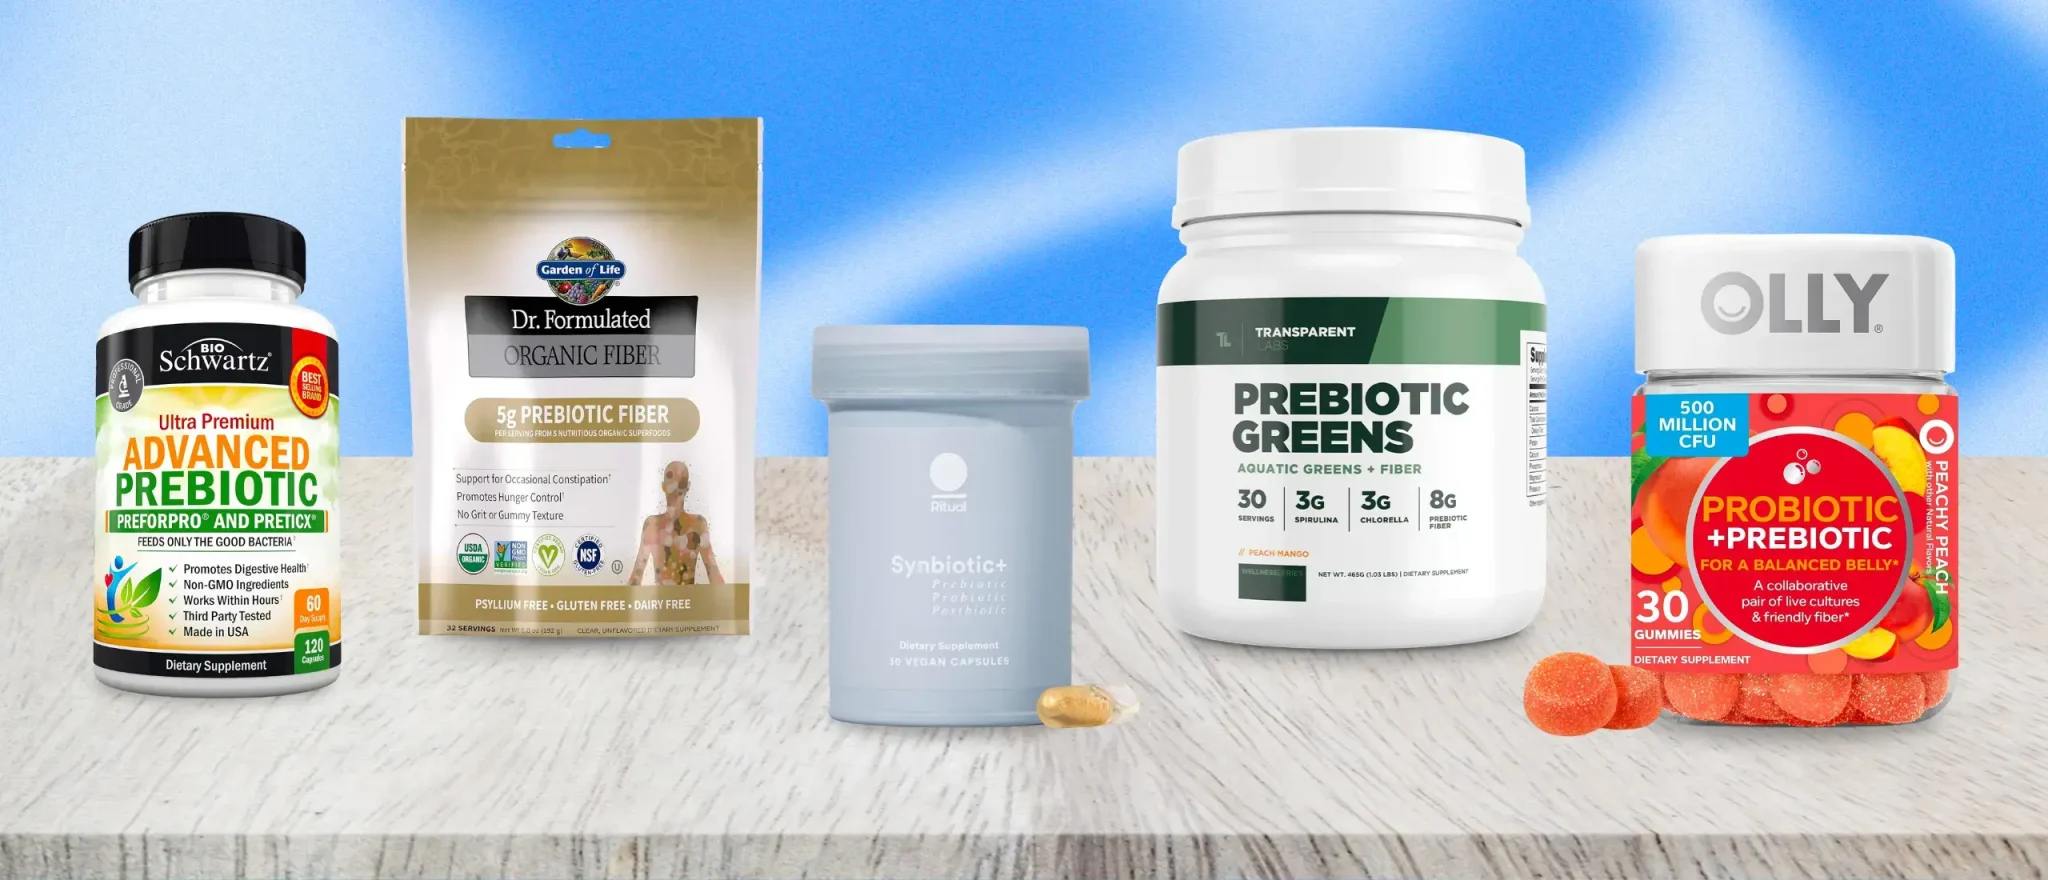 5 Best Prebiotic Supplements for a Healthier Gut, According to a Registered Dietitian